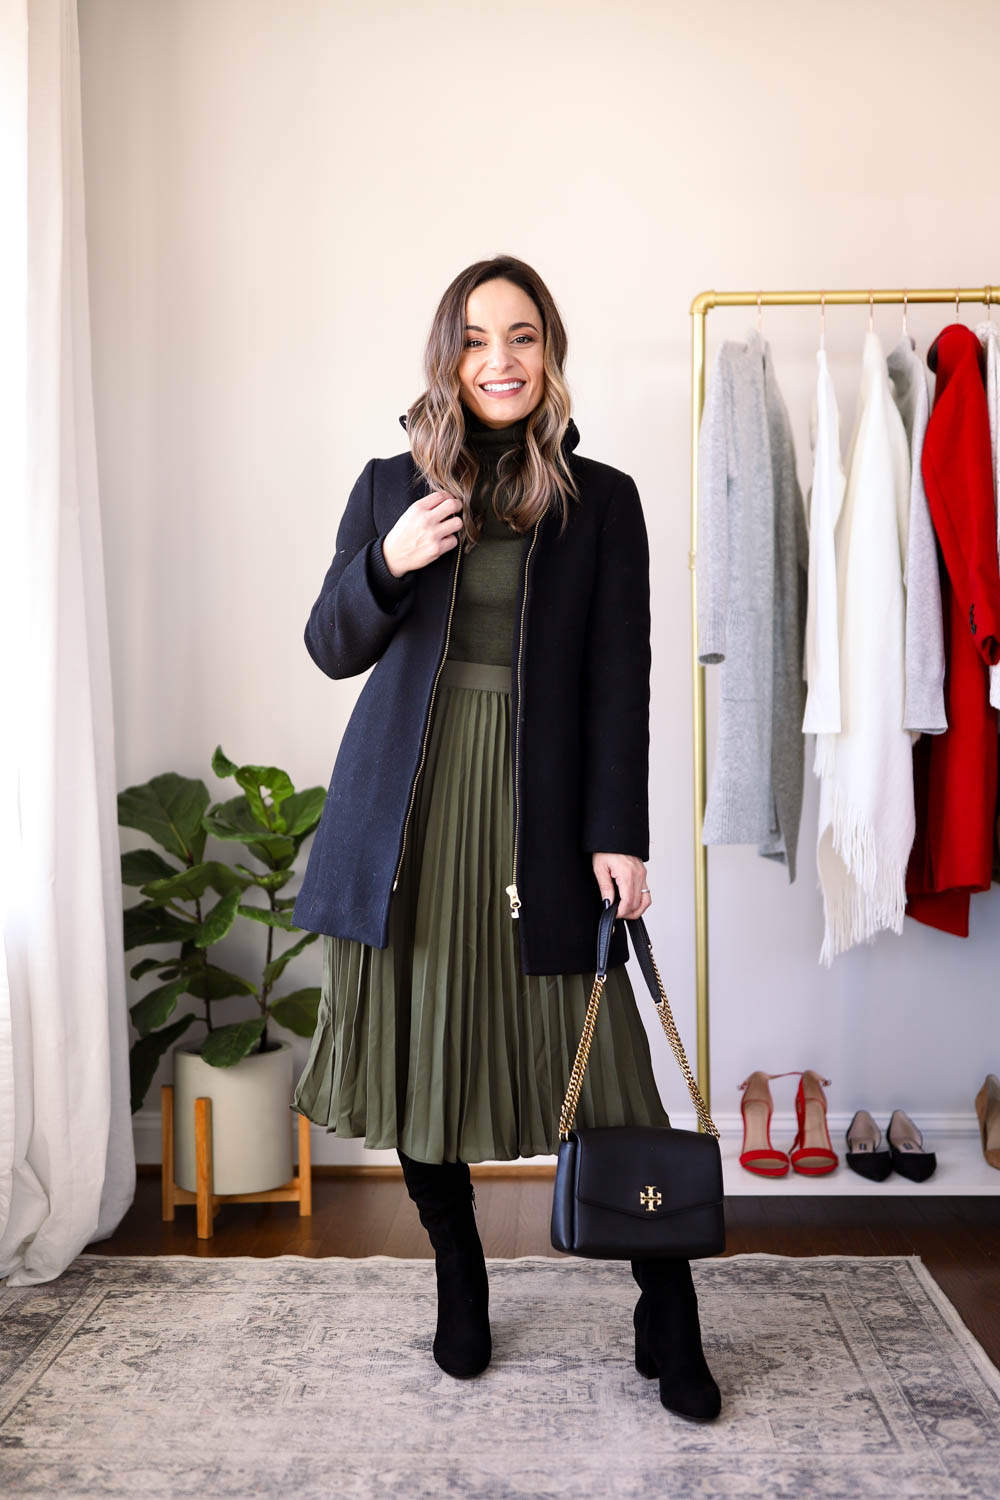 Winter work outfits 2021 | Dresses Images 2022